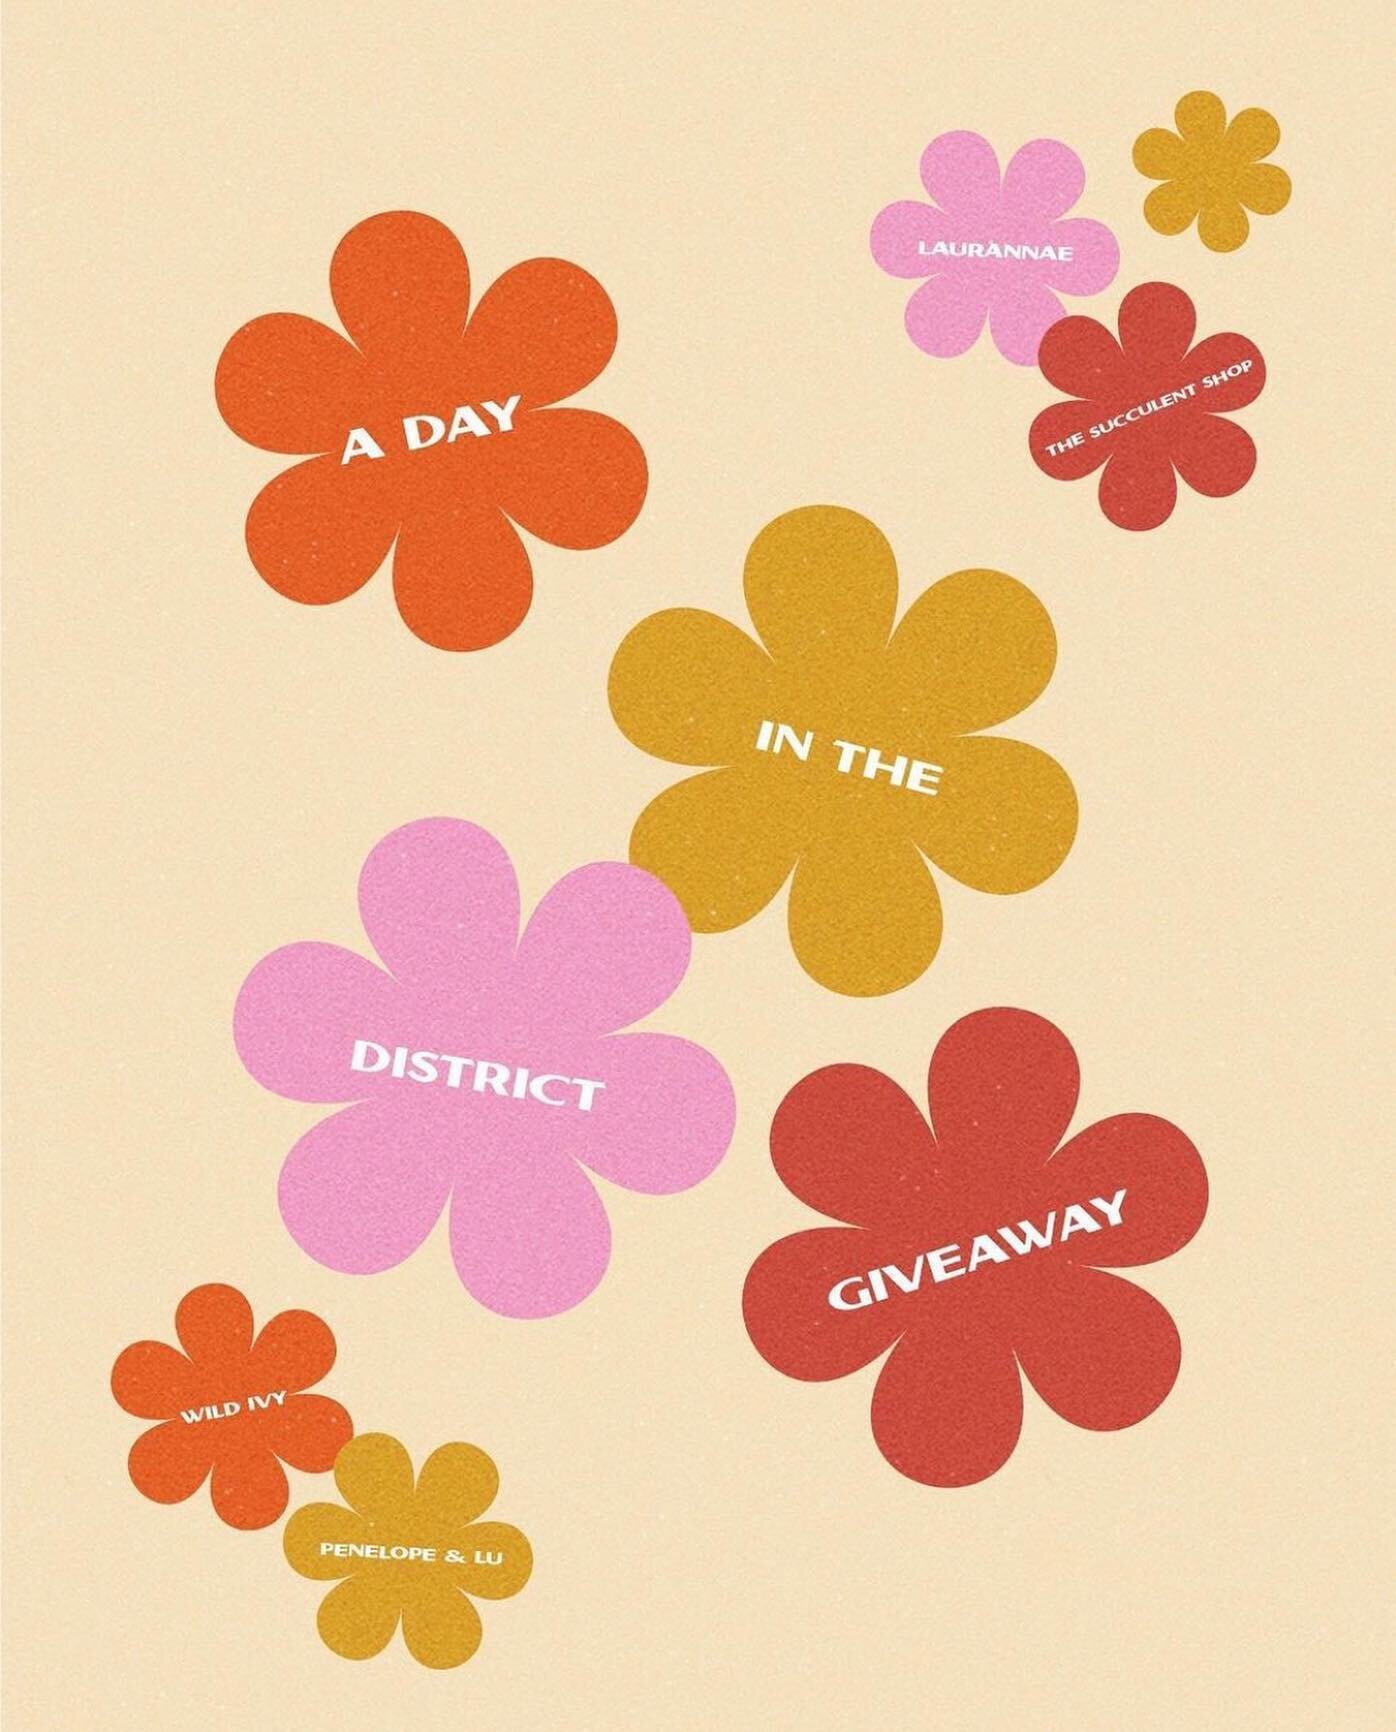 ✨GIVEAWAY✨
We love being apart of the @rosedistrict community so we've
partnered with some of our favorite shops to giveaway a day (or two) worth of rose district fun!

Winner will receive:
- 2 cake decorating workshop tickets &amp; tote bag
from @la